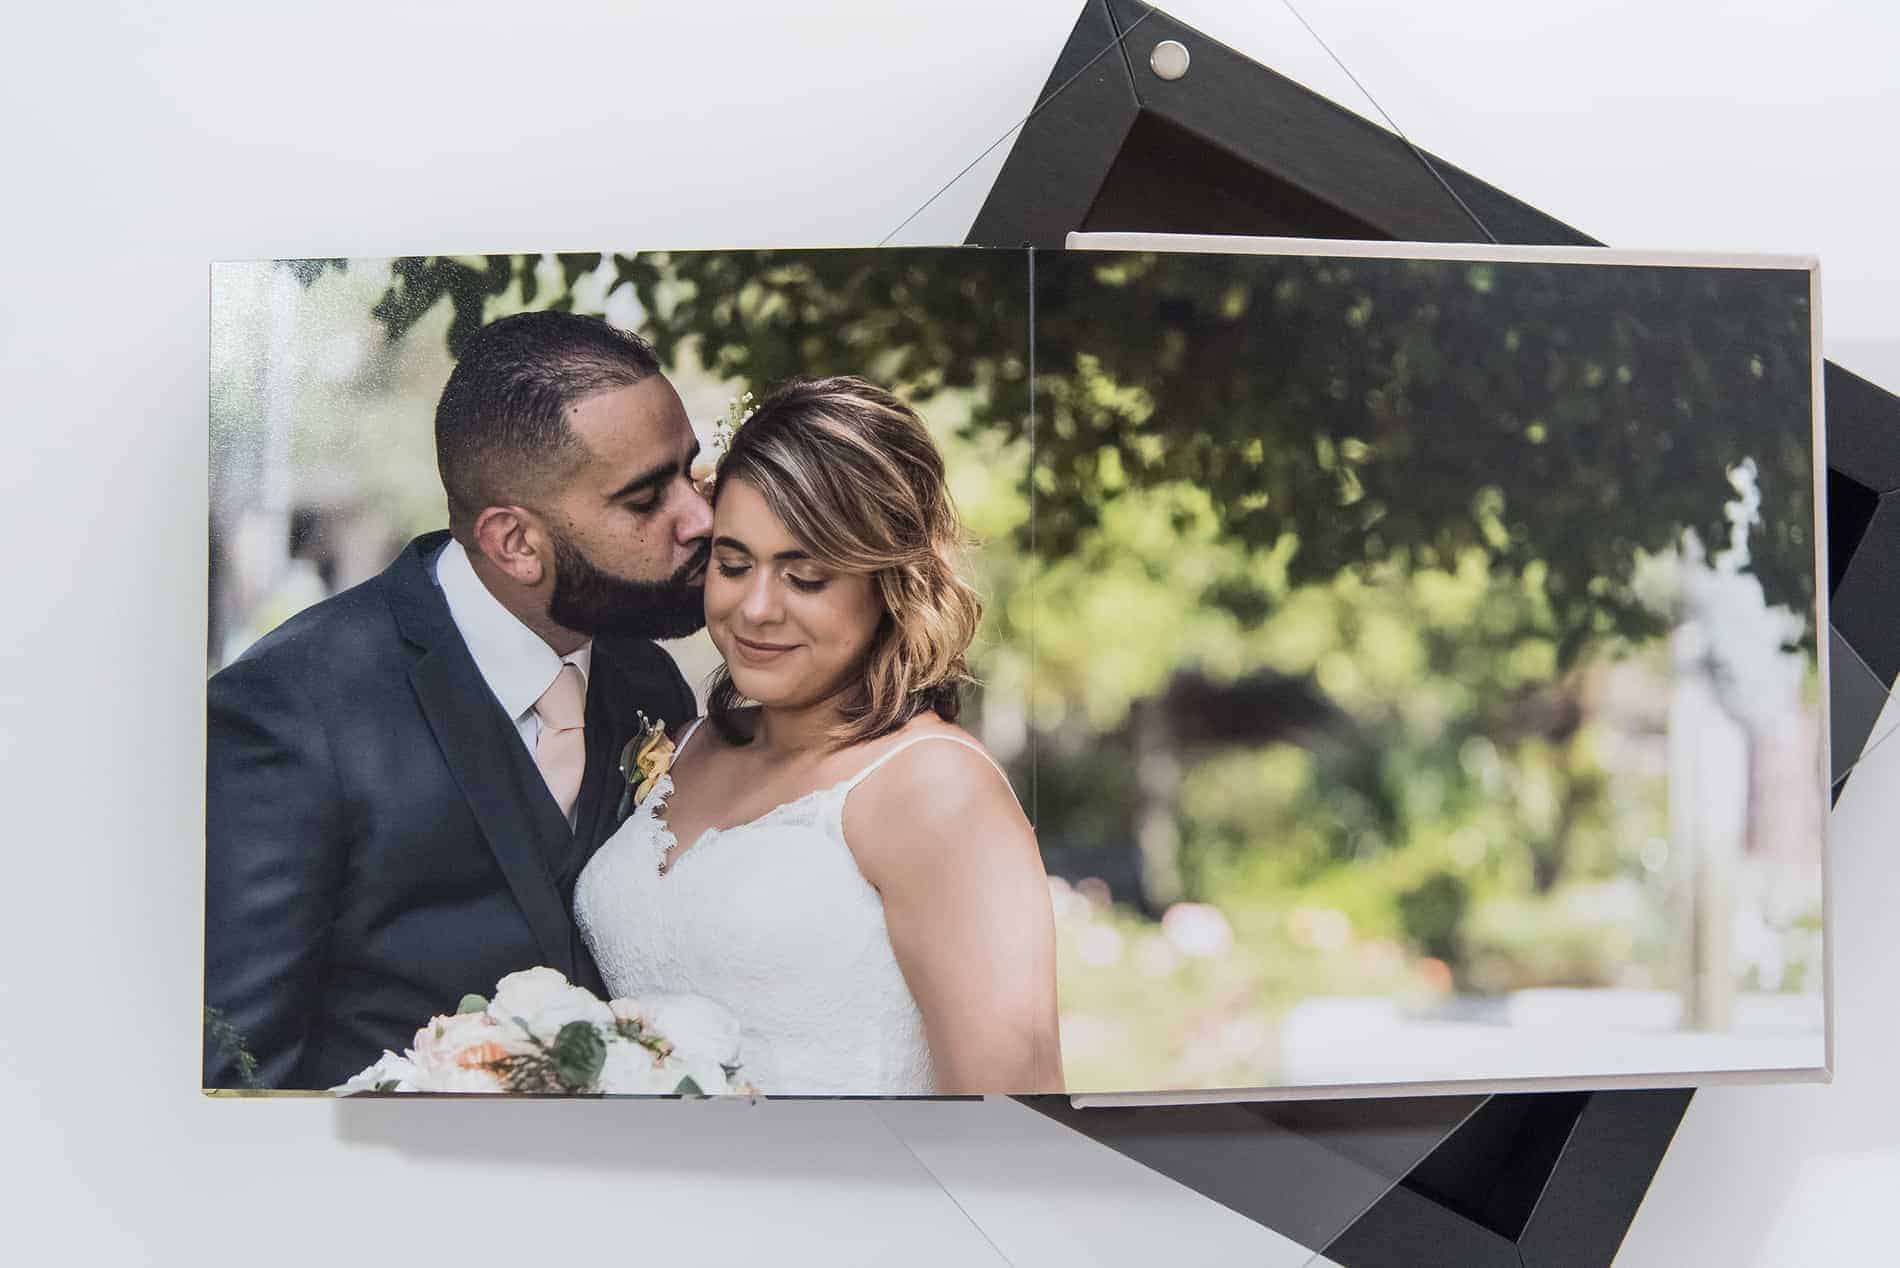 Cute couples wedding album produced by wedding photographers in Orlando